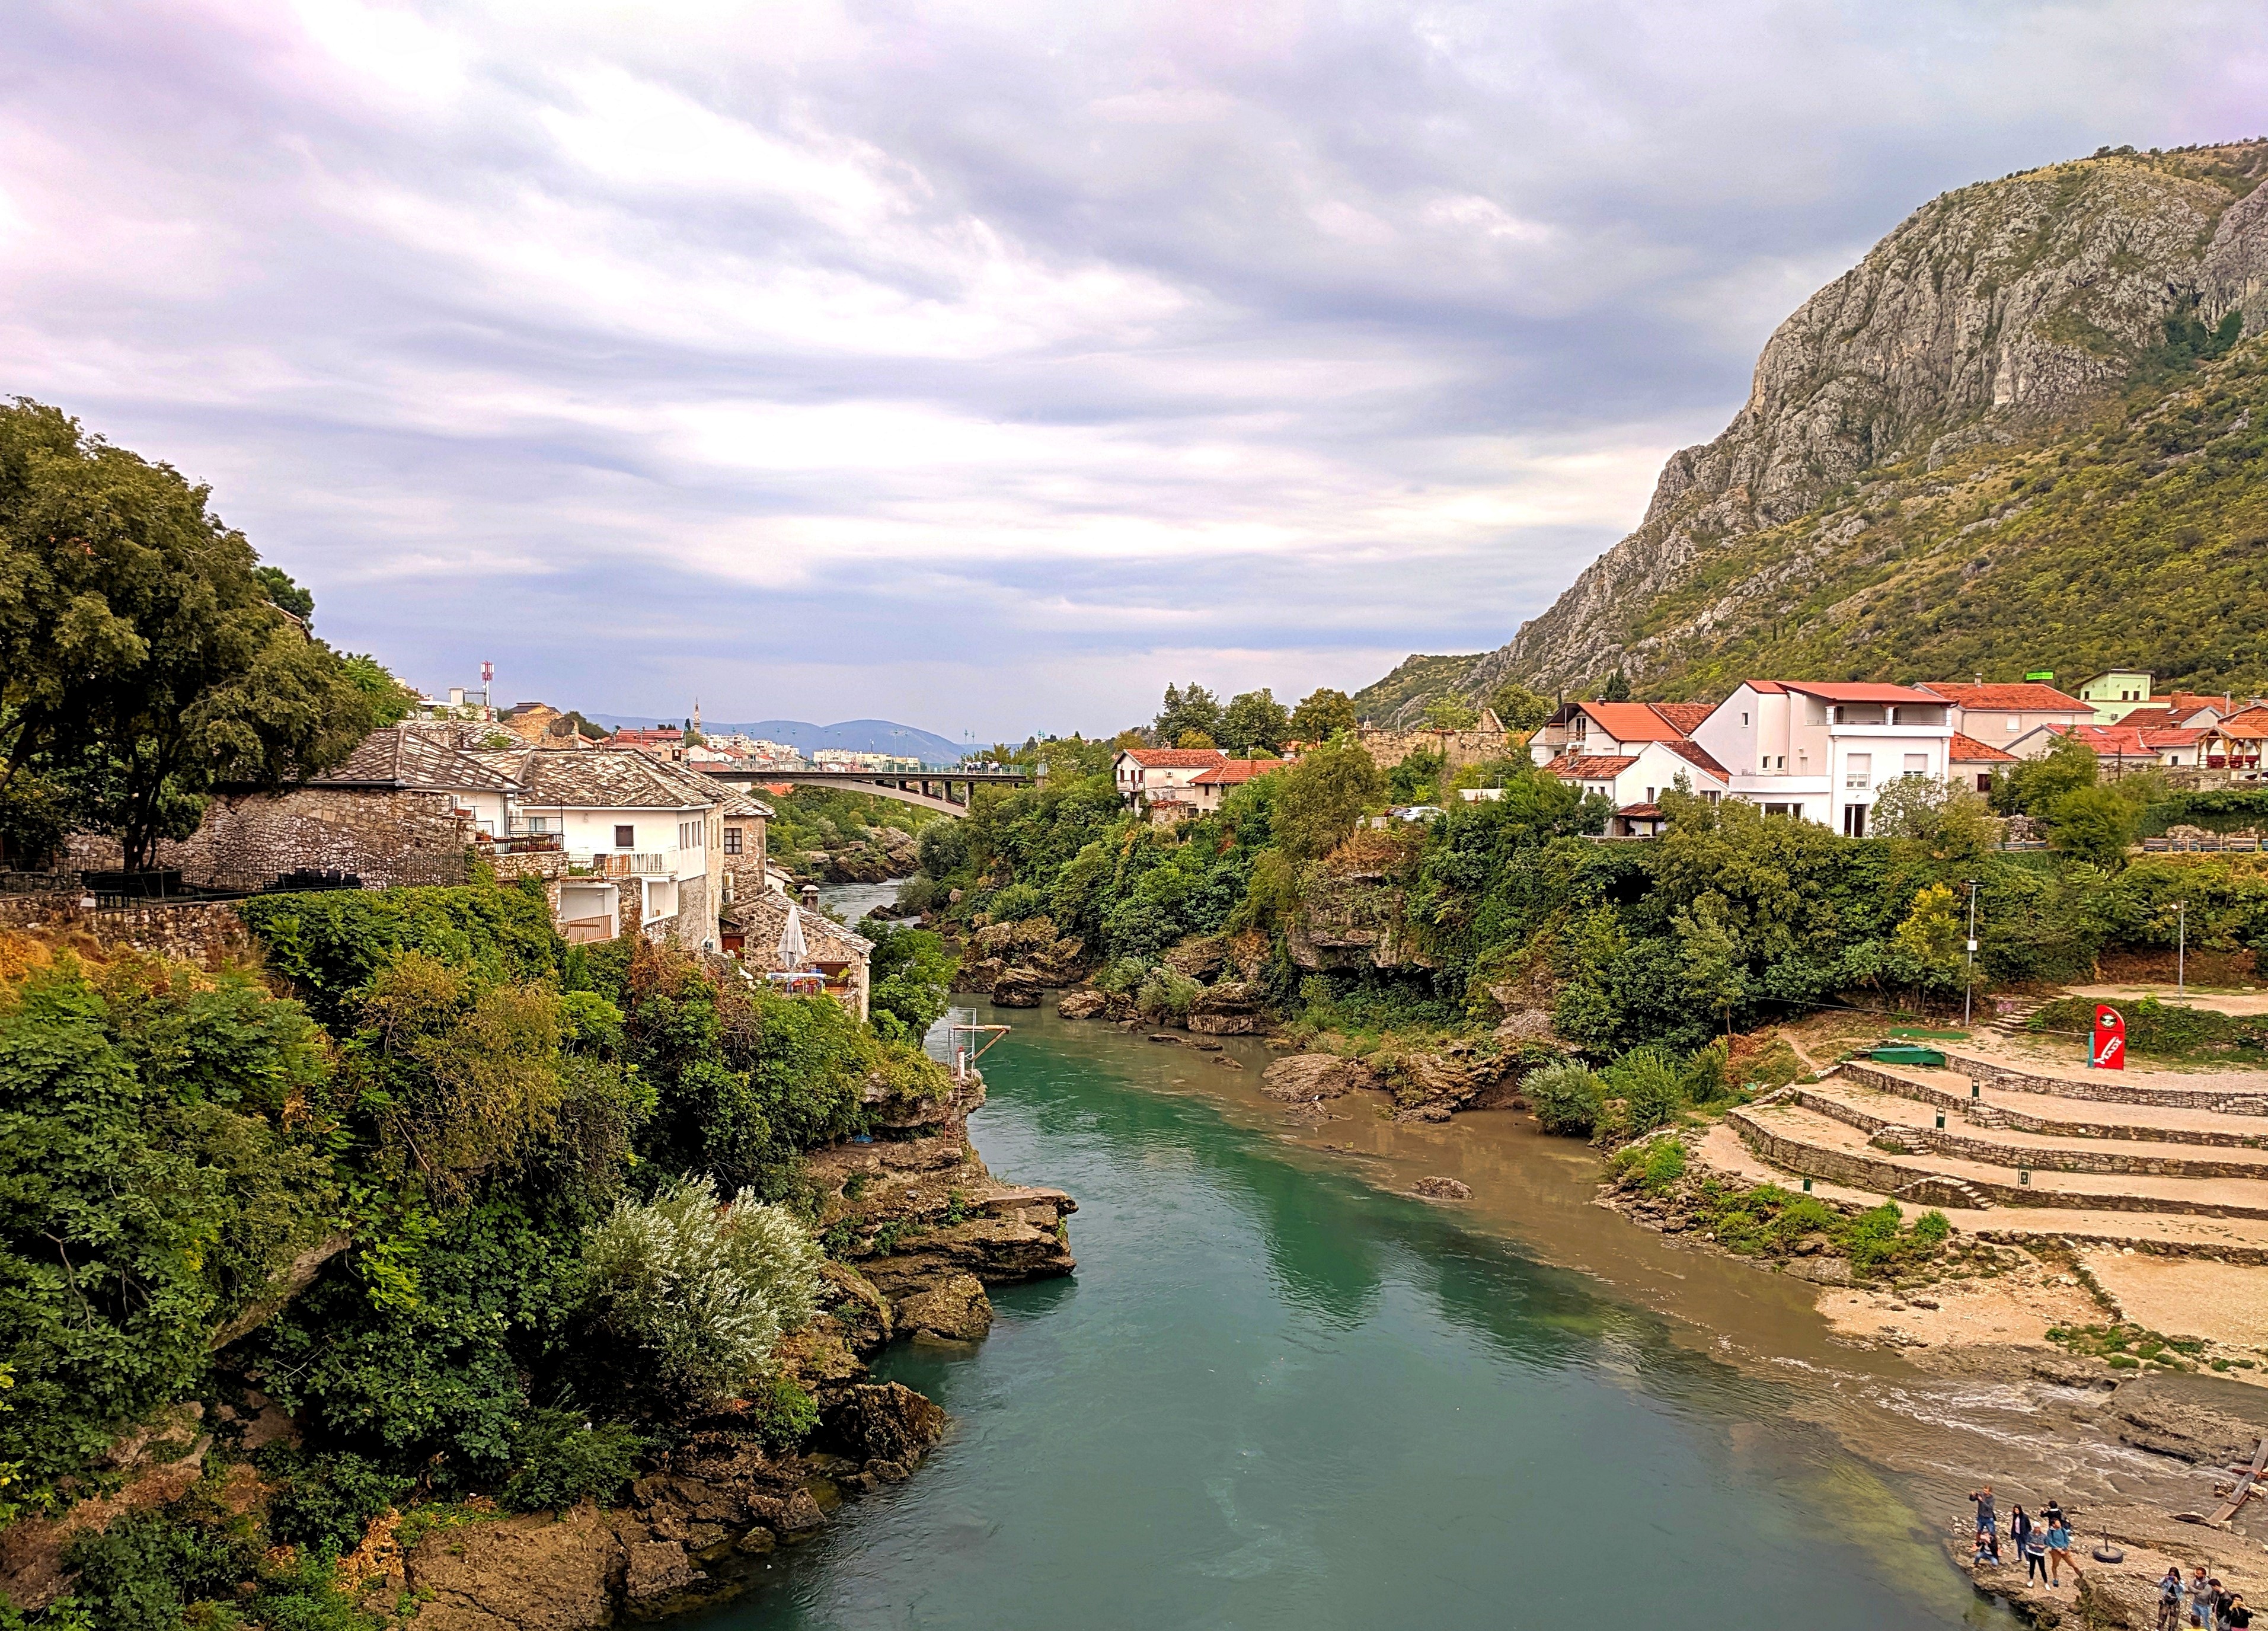 The view from the Old Bridge on the river Neretva